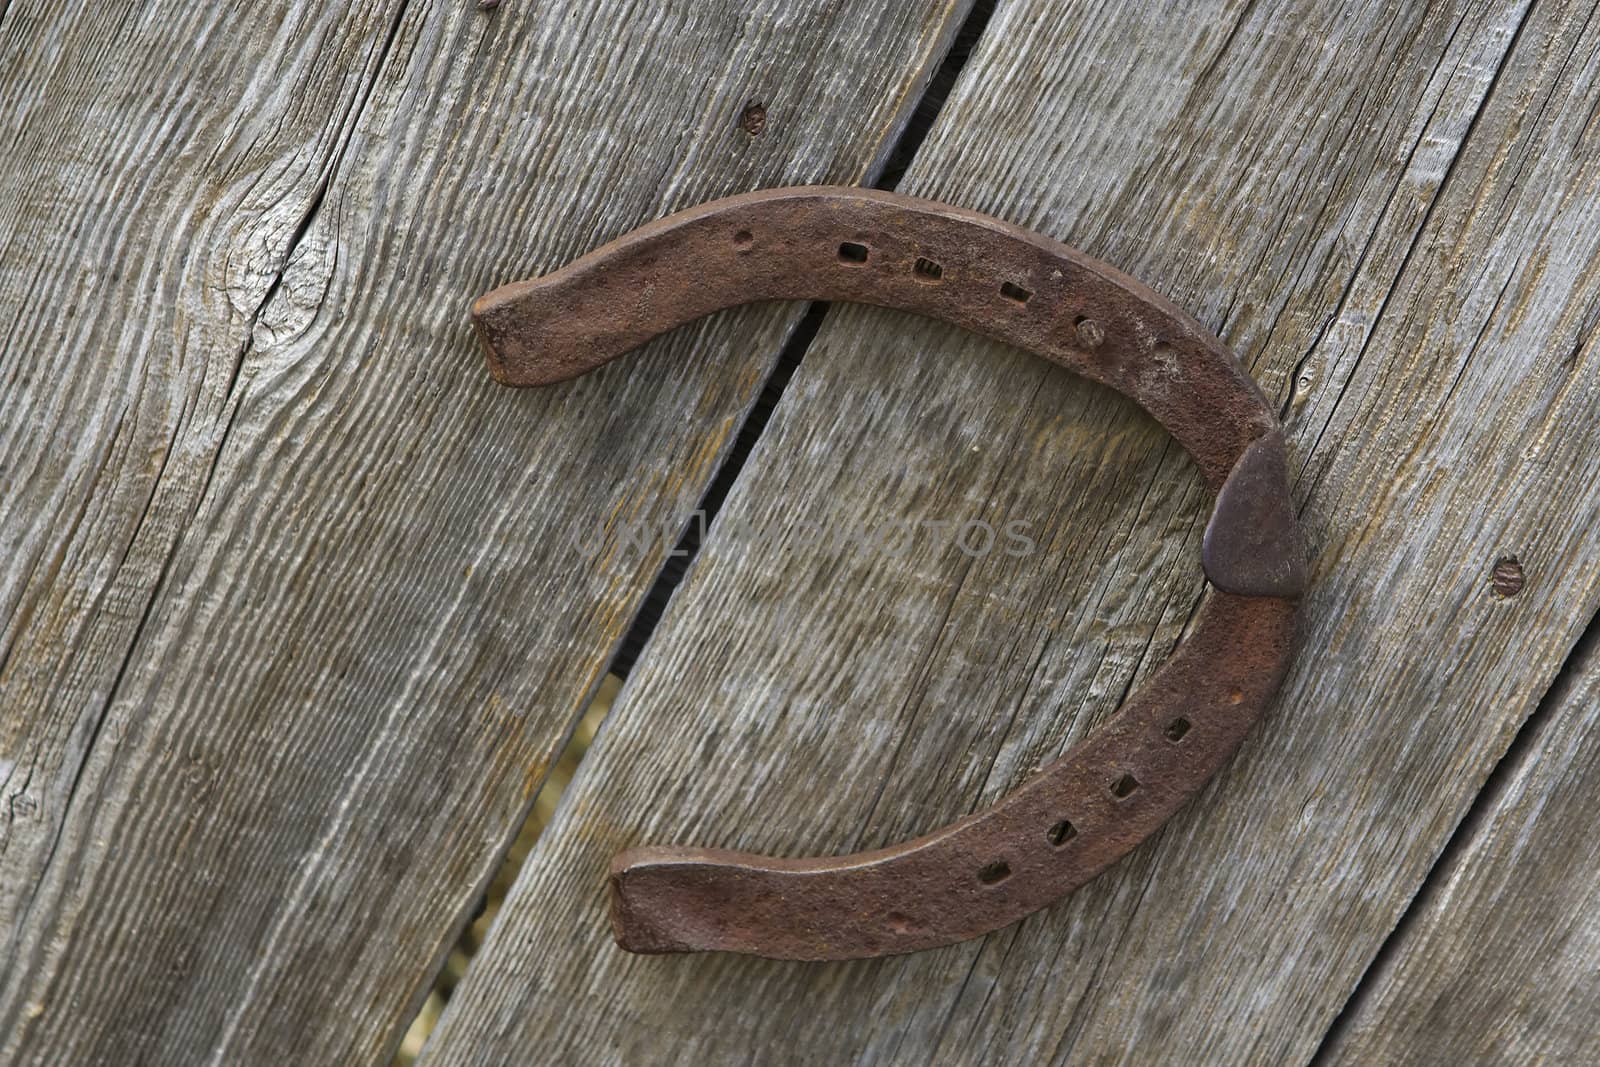 Old rusty horse shoe by Coffee999